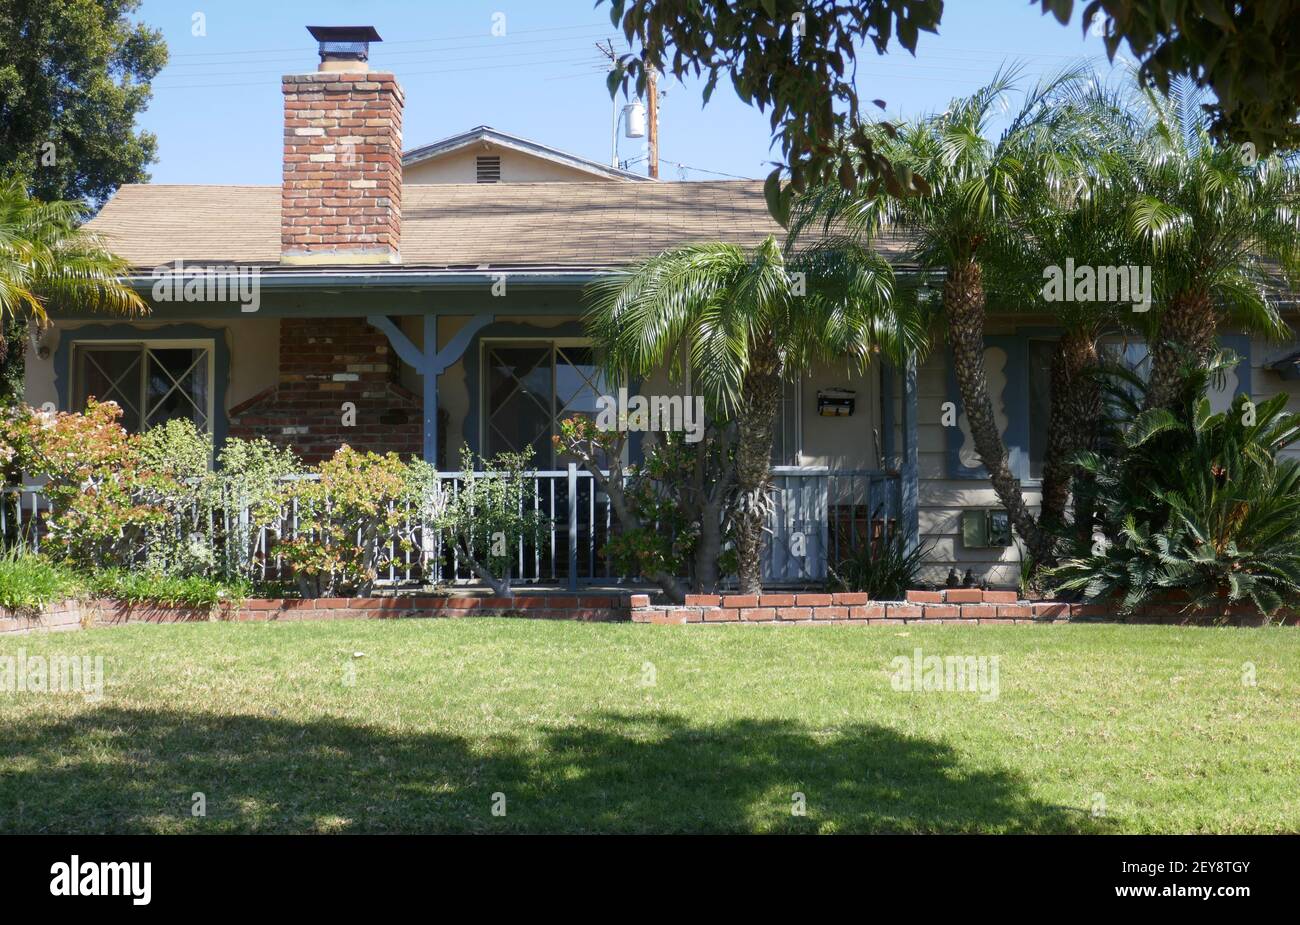 Anaheim, California, USA 4th March 2021 A general view of atmosphere of singer/musician Jeff Buckley's childhood home/house on March 4, 2021 in Anaheim, California, USA. Photo by Barry King/Alamy Stock Photo Stock Photo